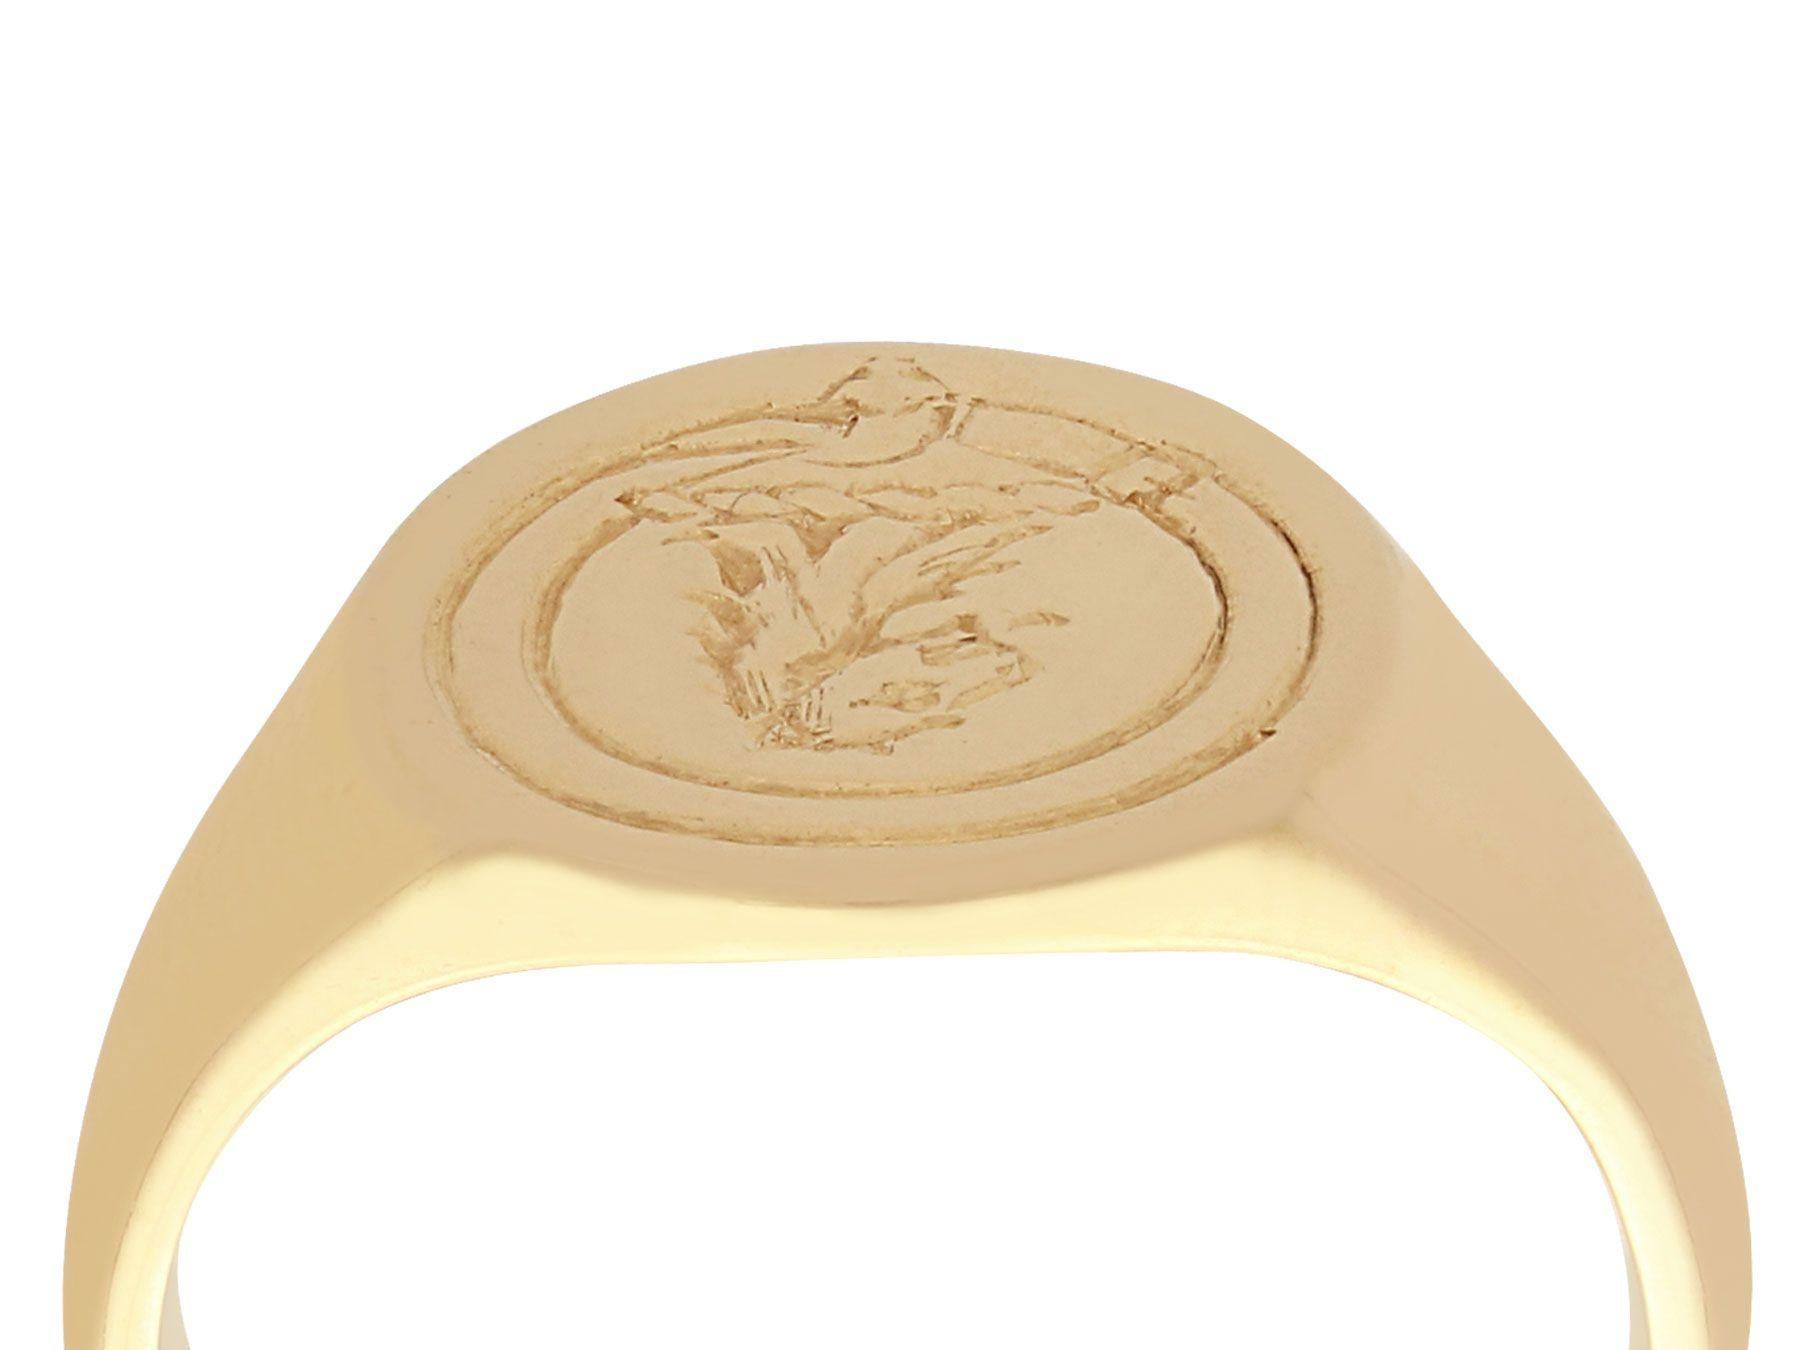 A fine and impressive intaglio signet ring in 18 karat yellow gold; part of our gent's jewelry and estate jewelry collections

This fine and impressive lion signet ring has been crafted in 18k yellow gold.

The circular anterior face of this